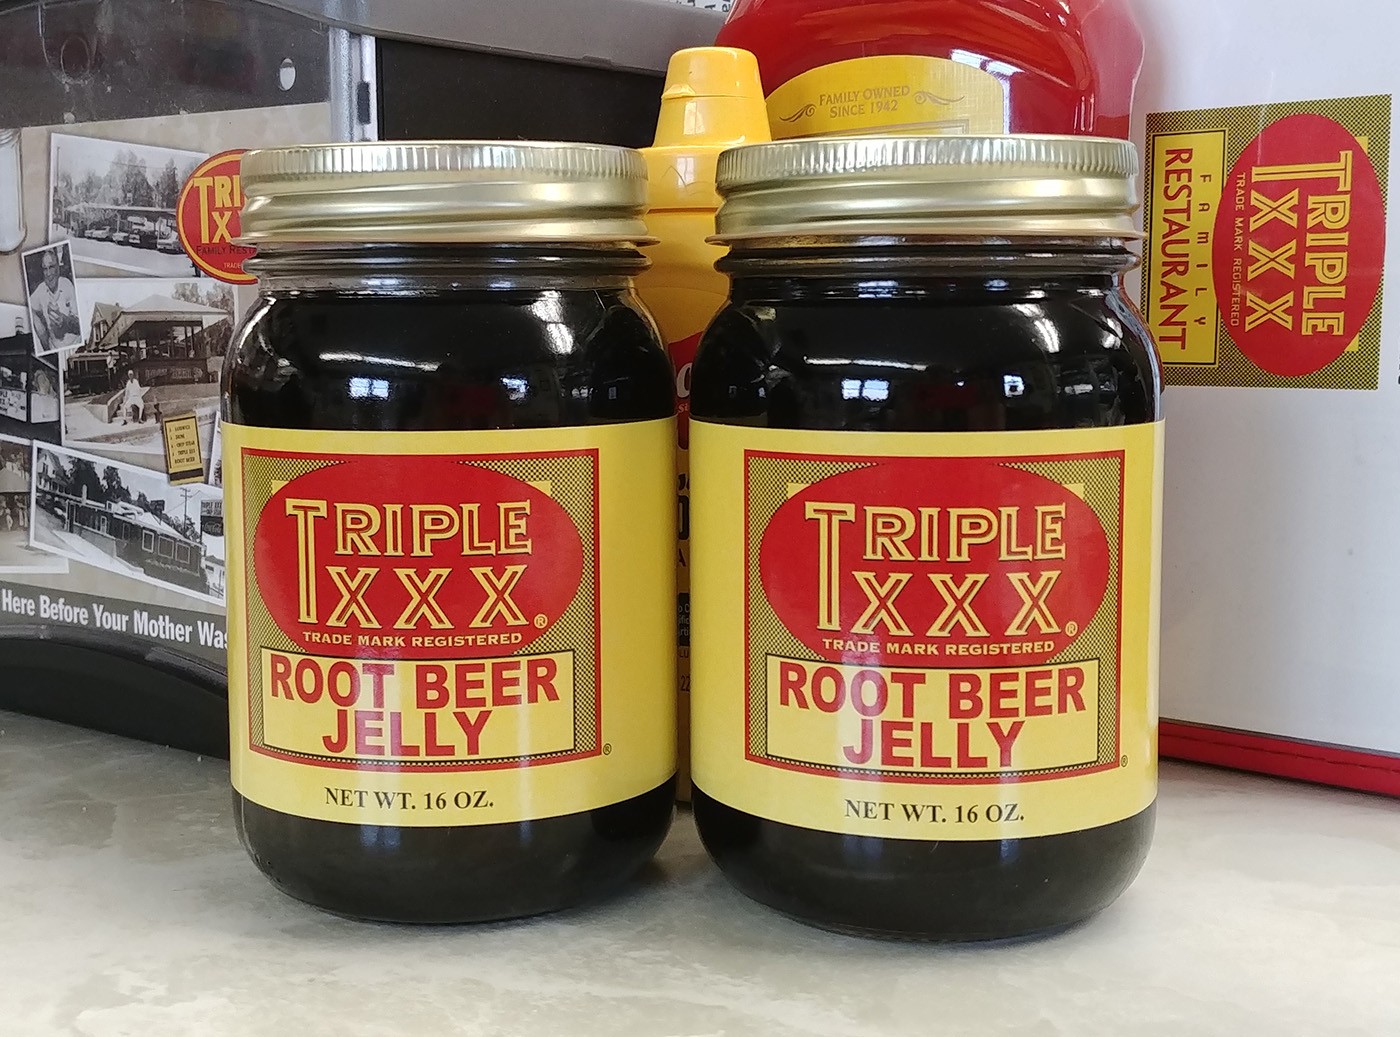 Triple XXX Root Beer Jelly